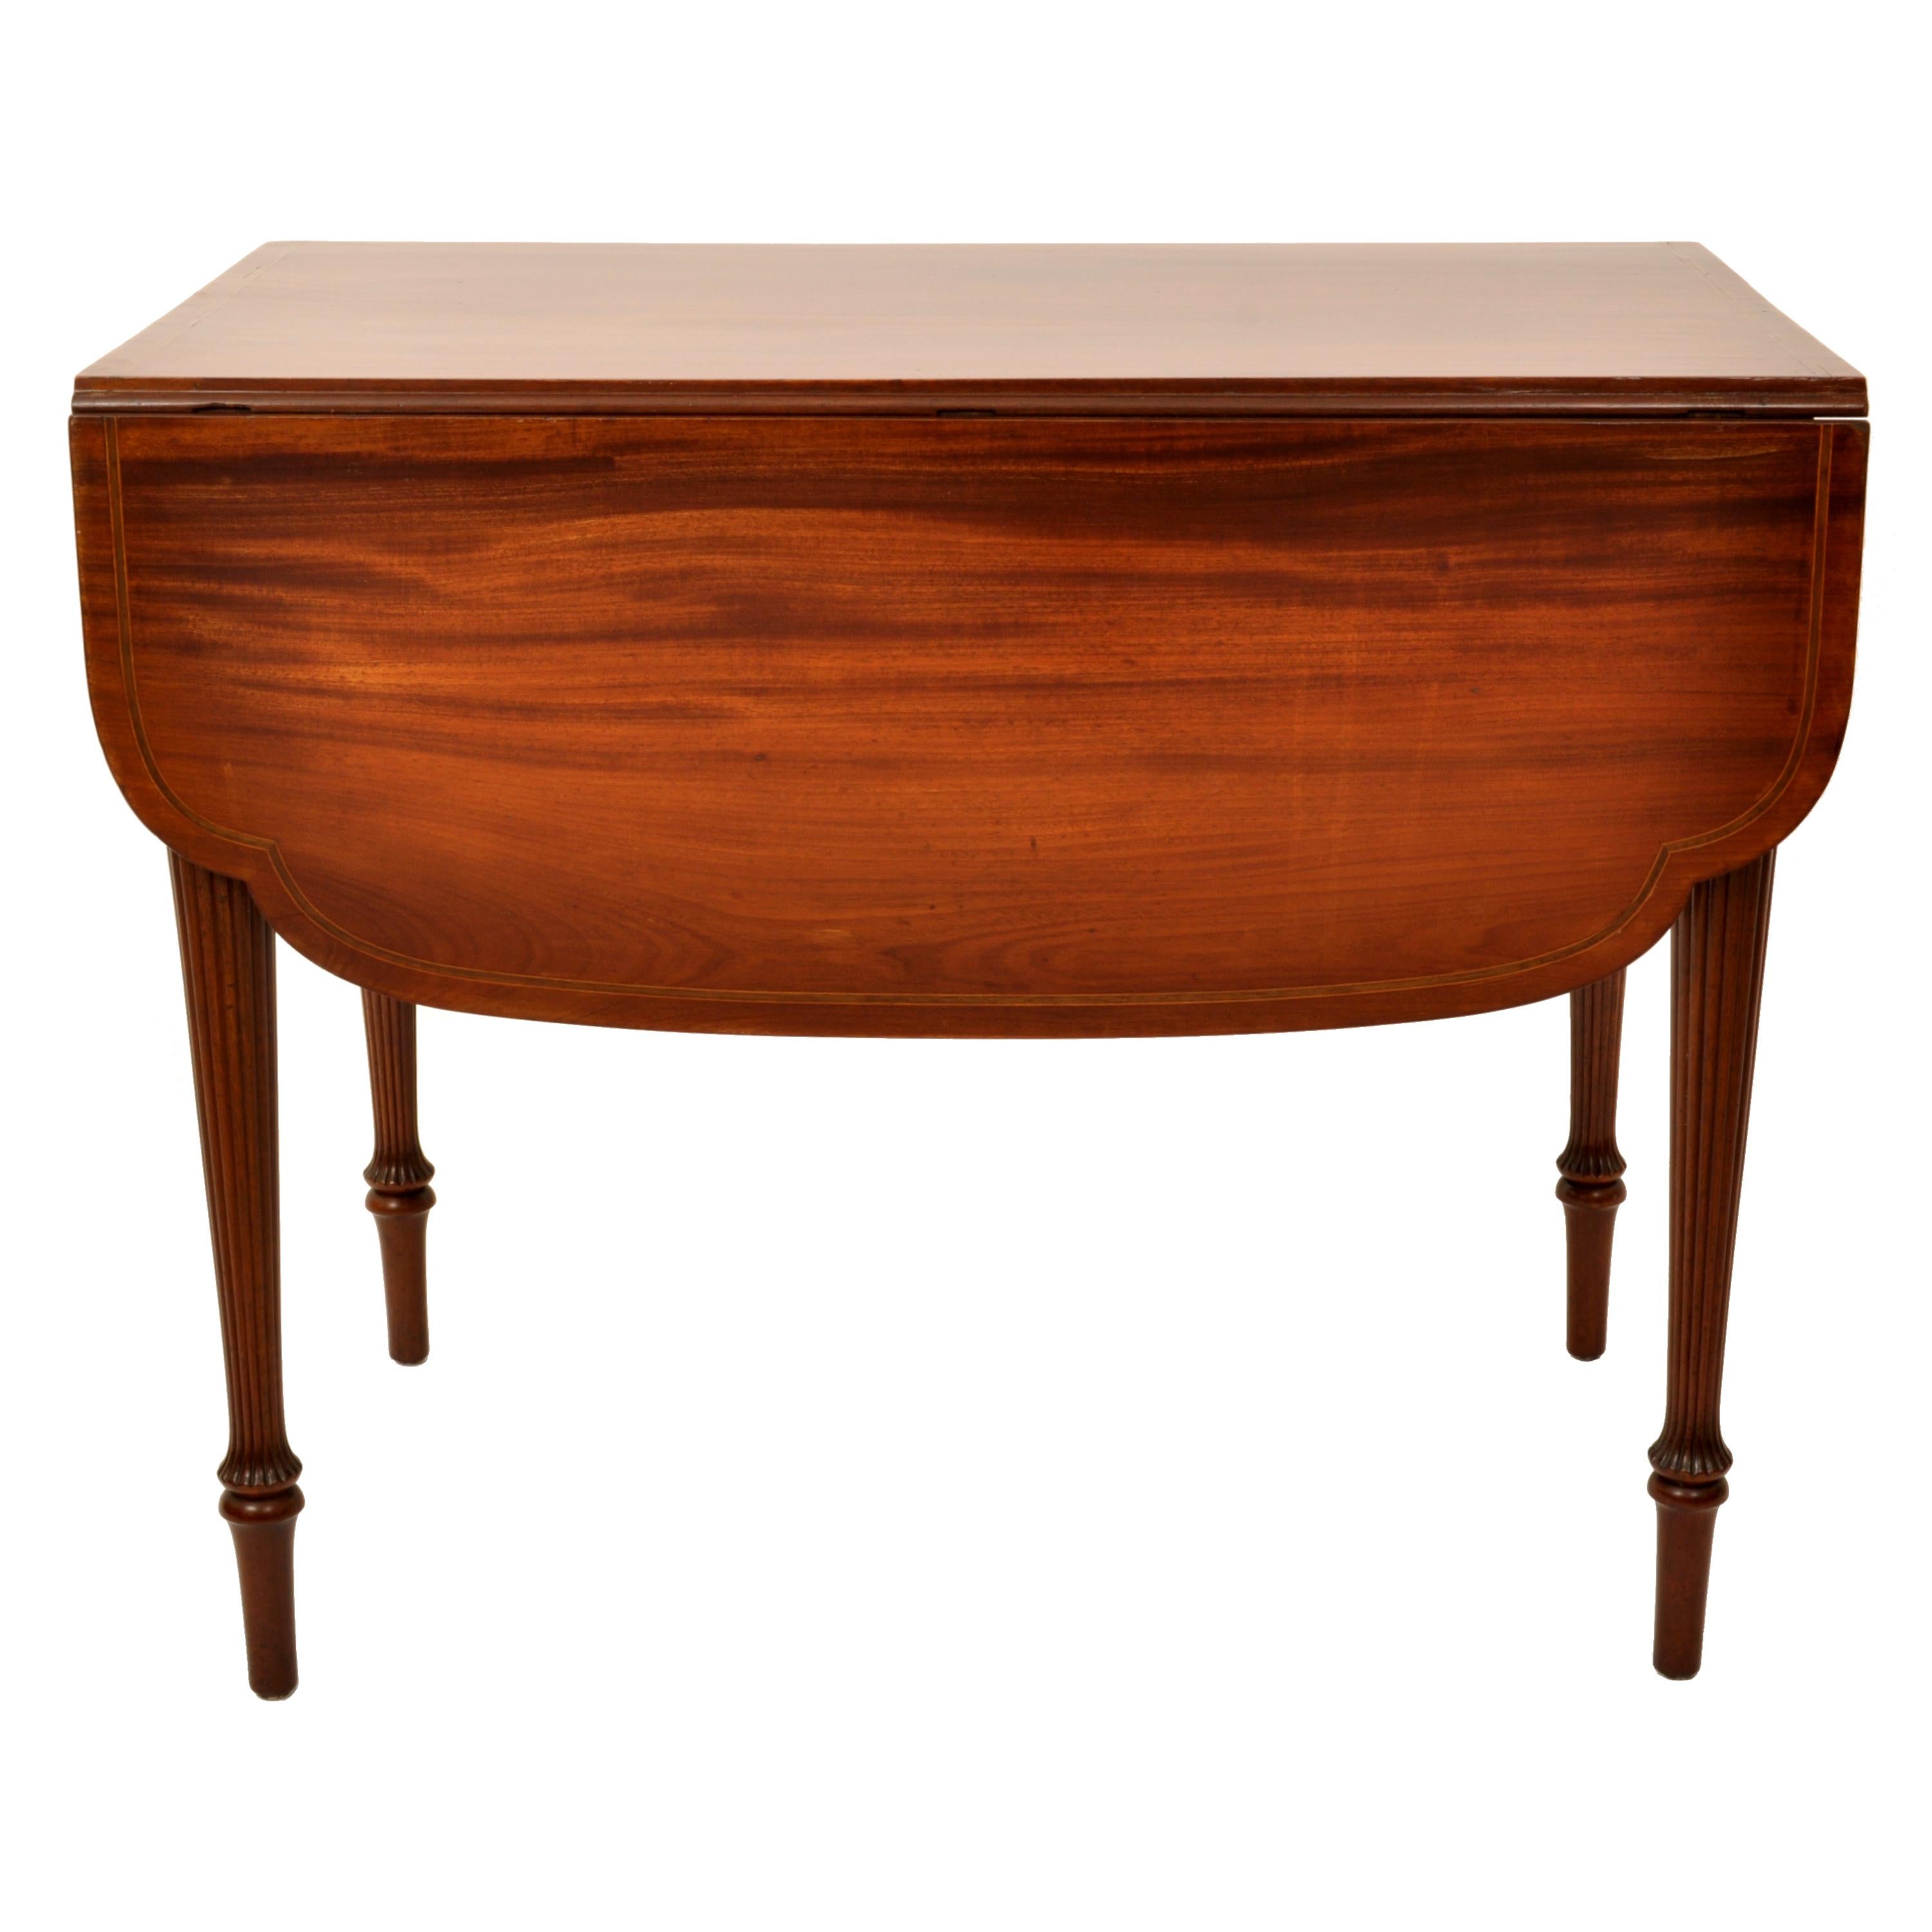 Inlay Antique American Federal Sheraton Inlaid Mahogany Pembroke Table New York 1790 For Sale